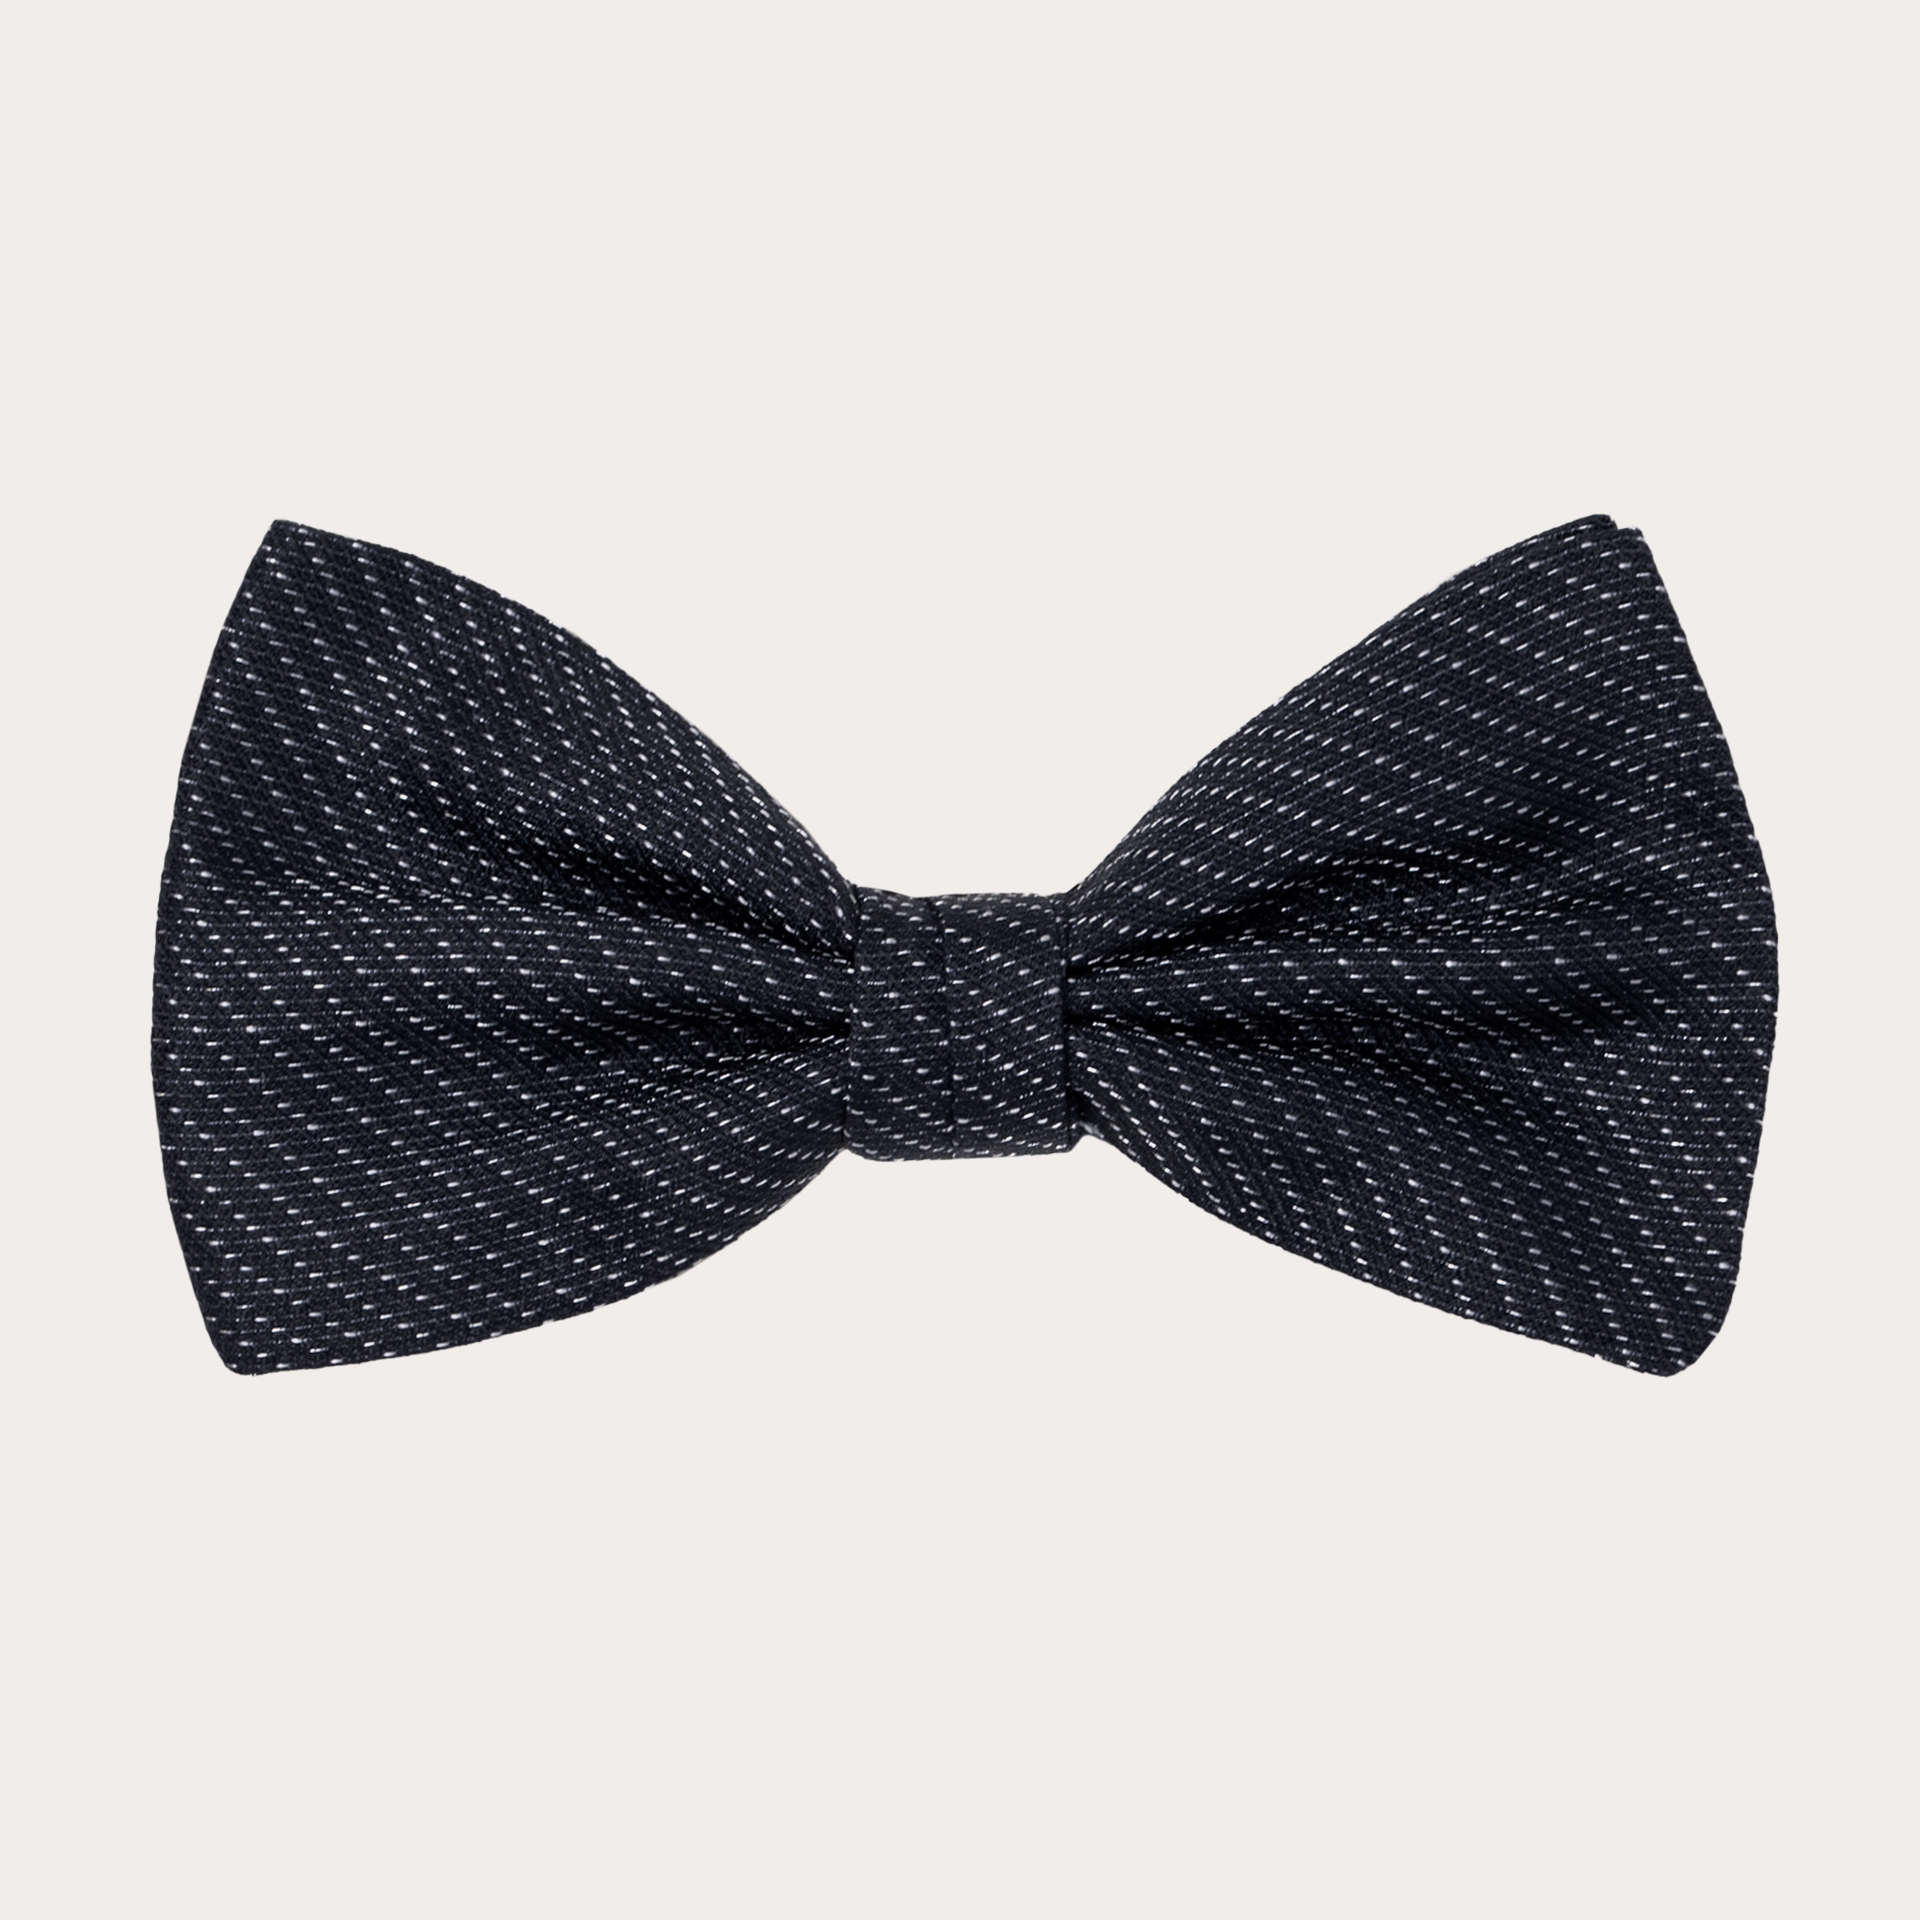 Silk pre-tied bow tie, blue navy with silver dotted pattern